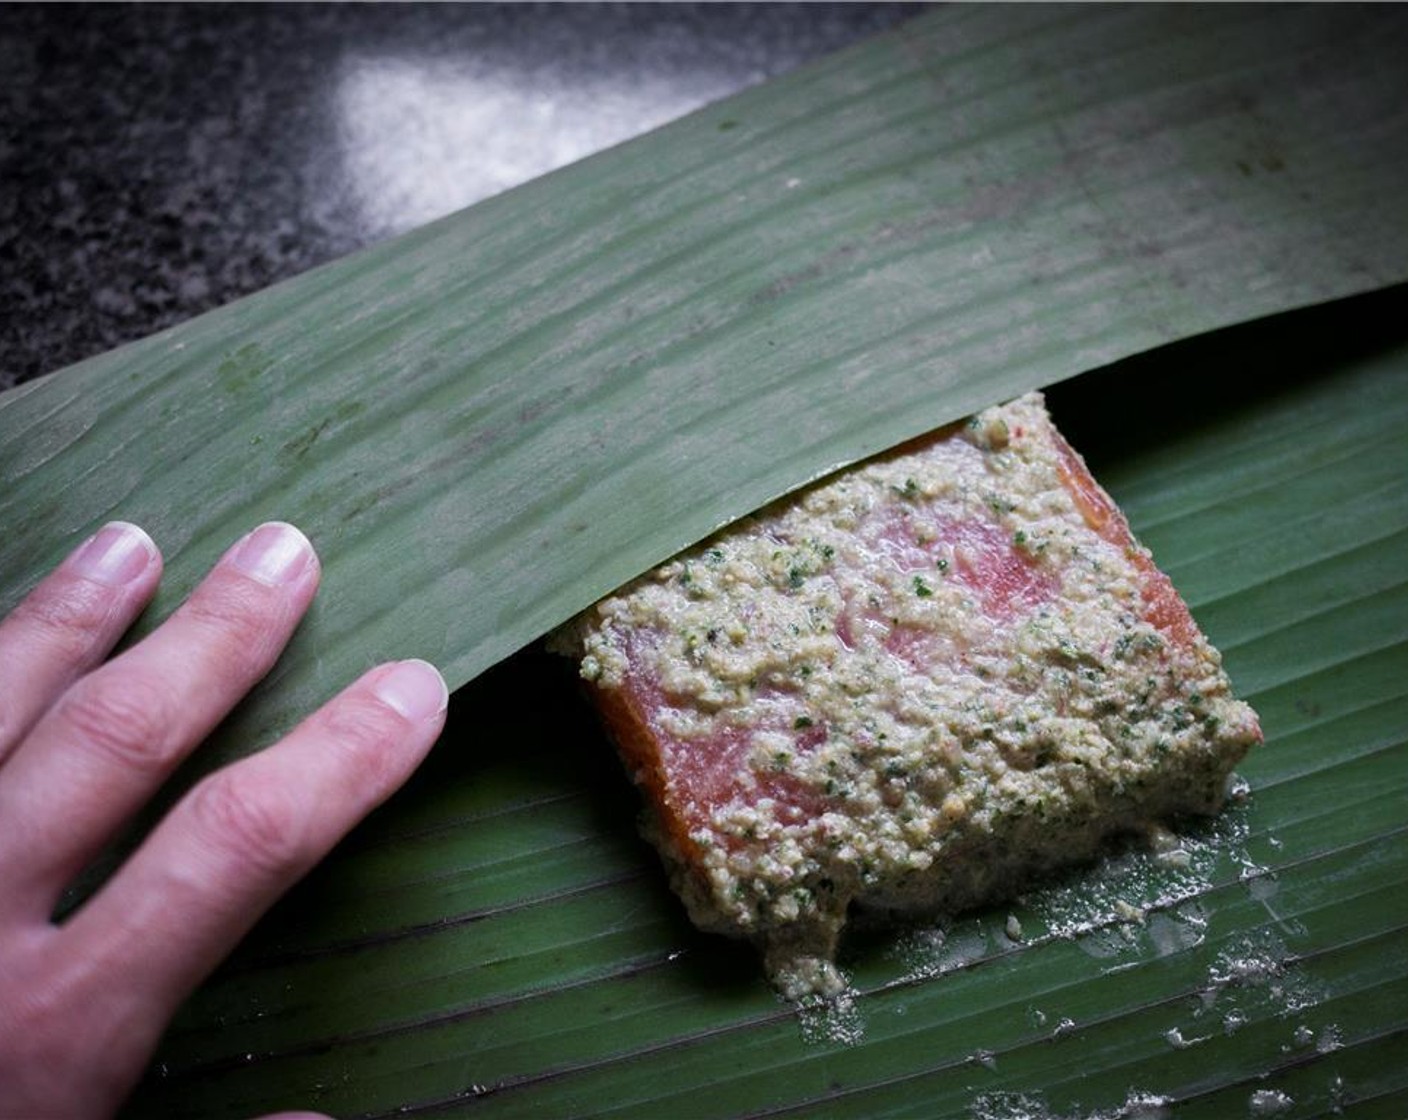 step 5 Place each fish fillet in the middle of one of the Banana Leaves (1 pckg). Fold each side in to form a packet. Place each packet seam side down into a baking dish or pan.